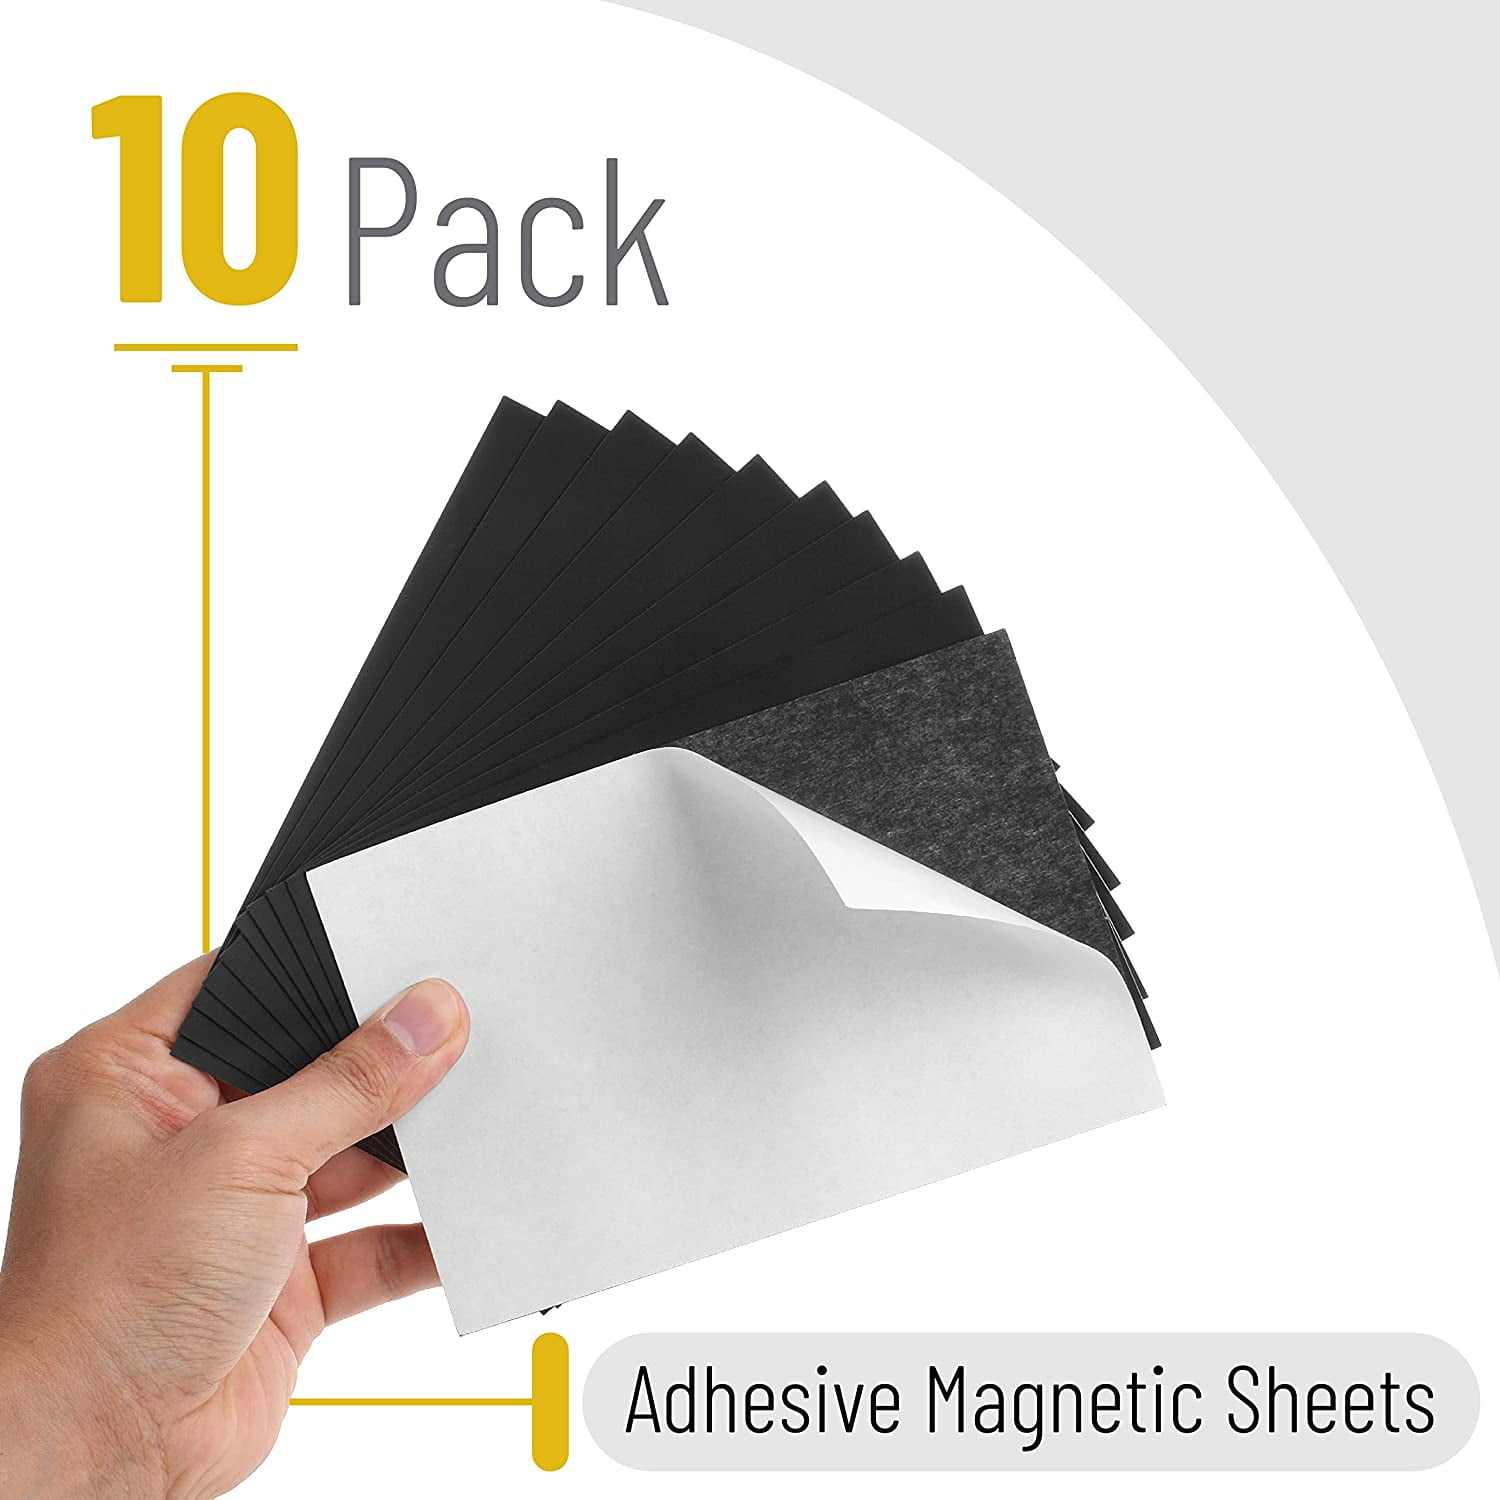  Adhesive Magnetic Sheets, 4 x 6, 10 Pack, Magnetic Sheets with Adhesive  Backing, Magnetic Sheets, Flexible Magnetic Sheet, Picture Magnets